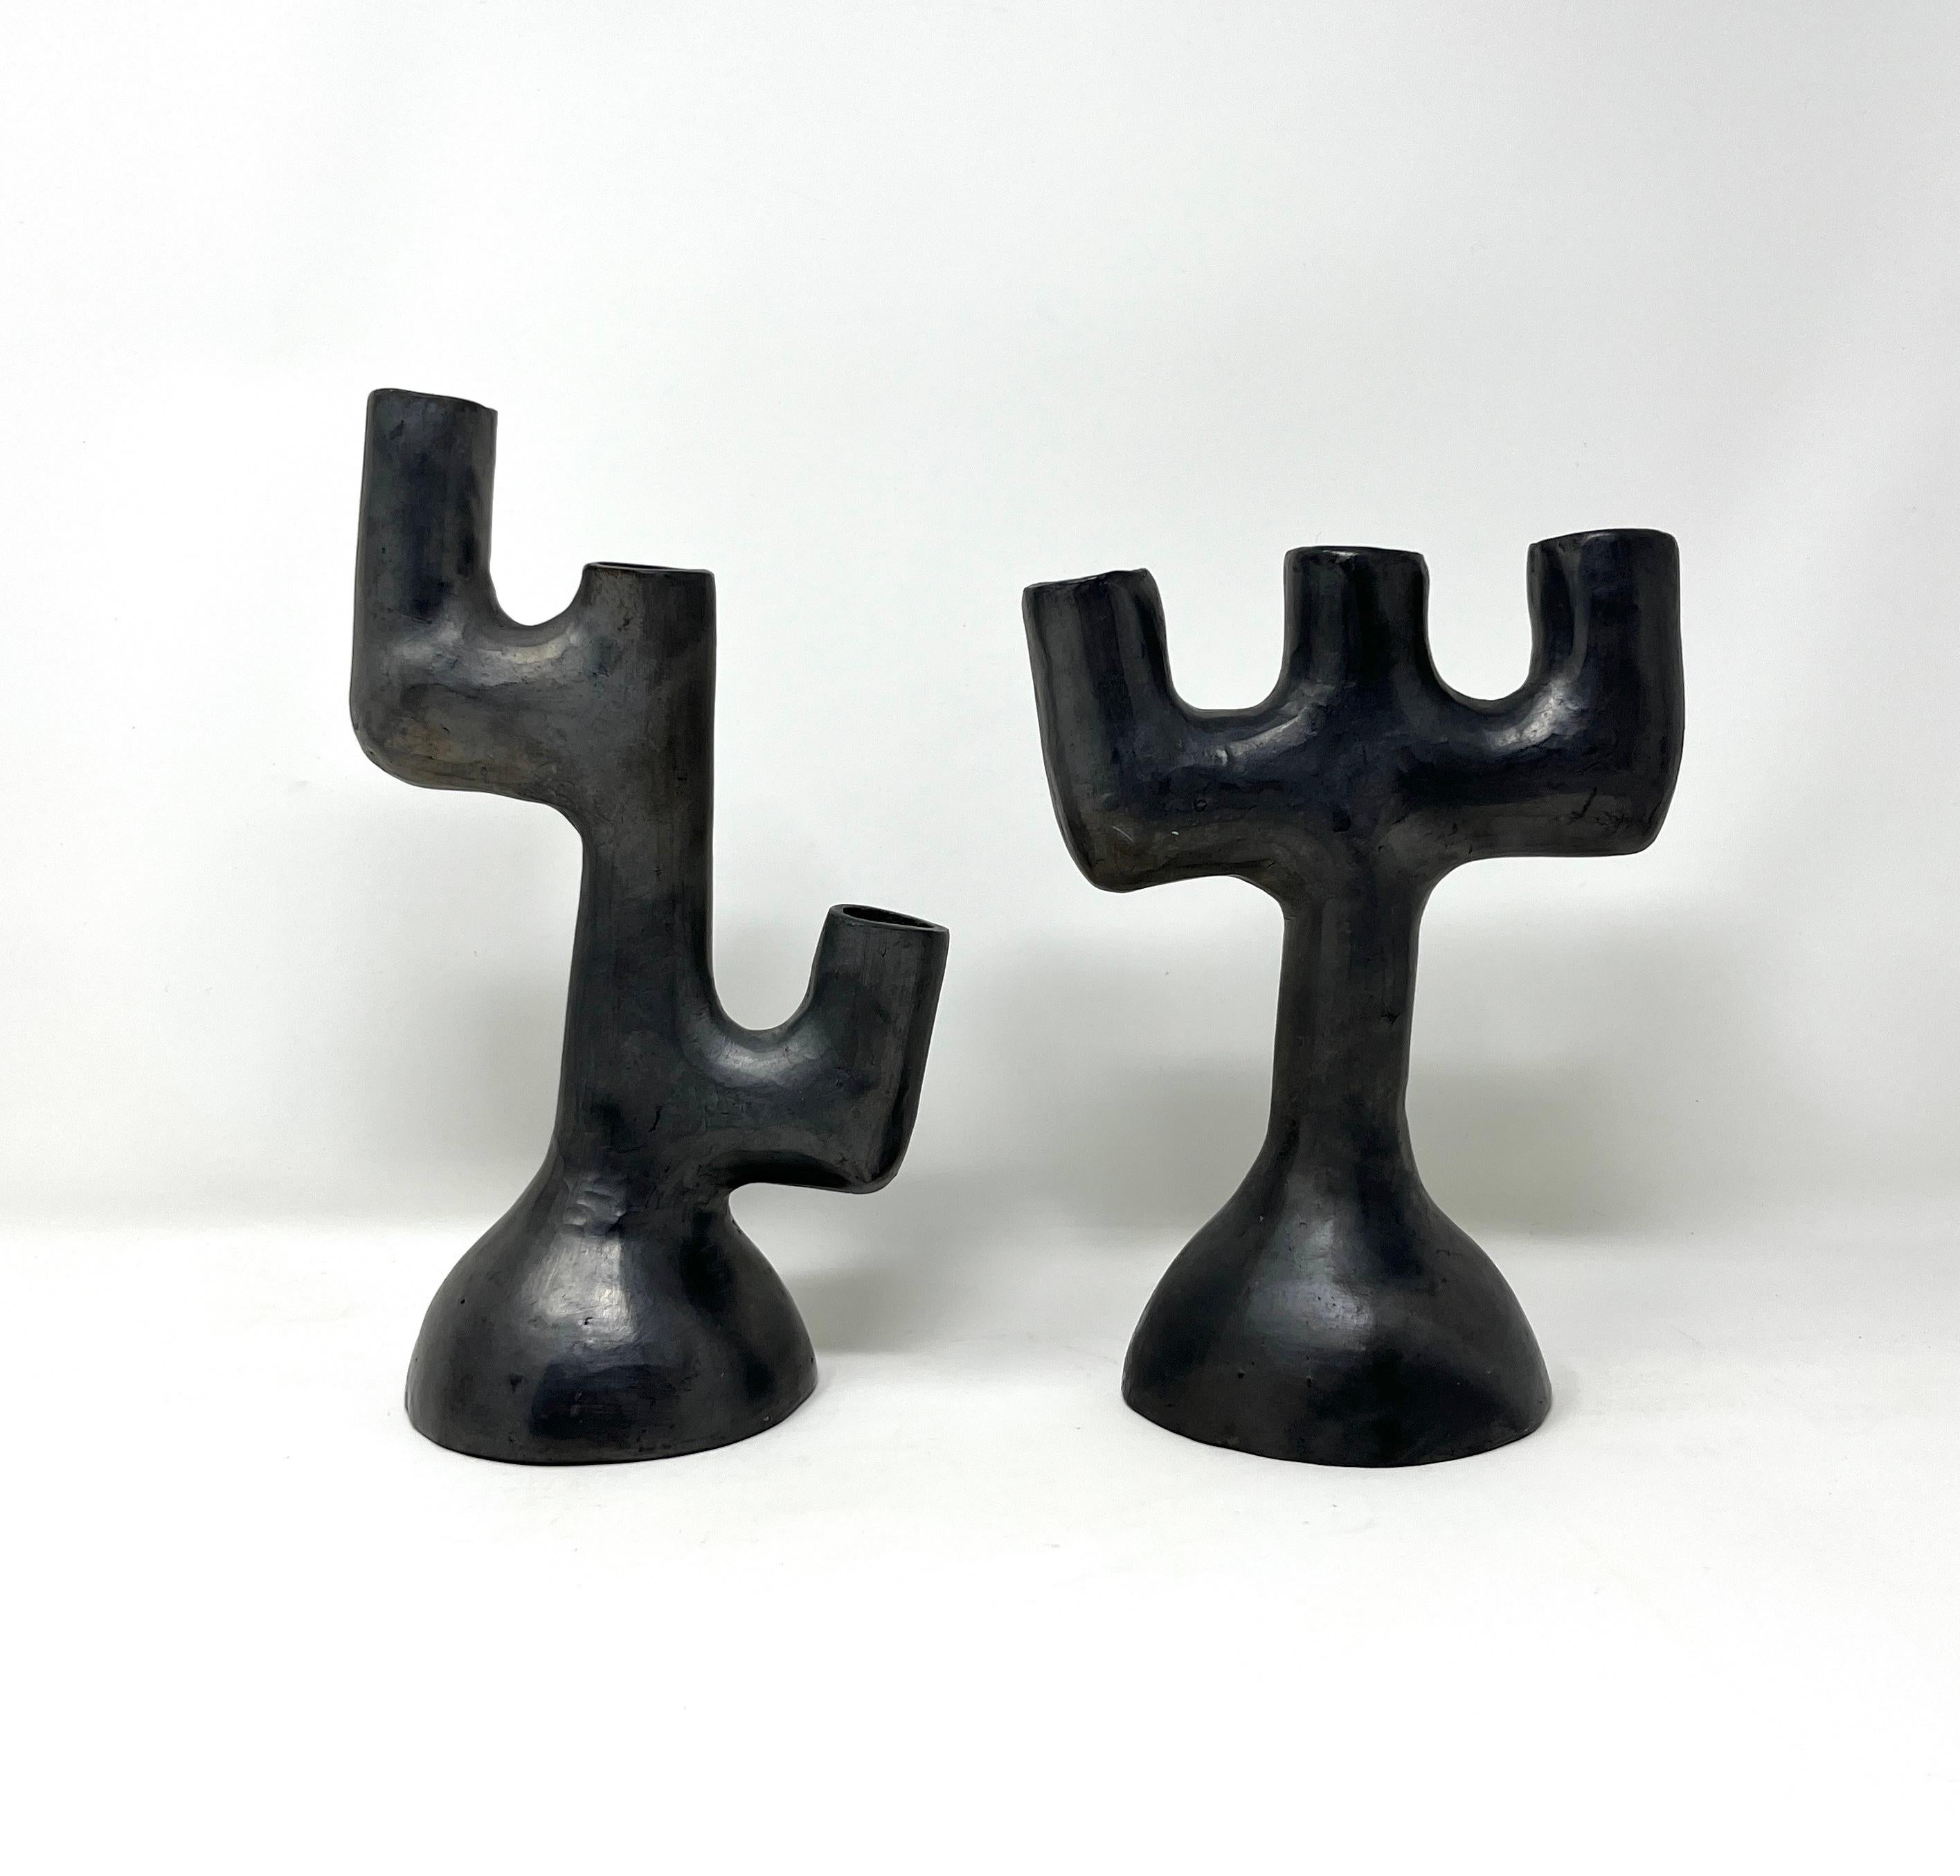 American Colonial Vintage Mexican Folk Art Burnished Barro Negro Candle Holders from Oaxaca